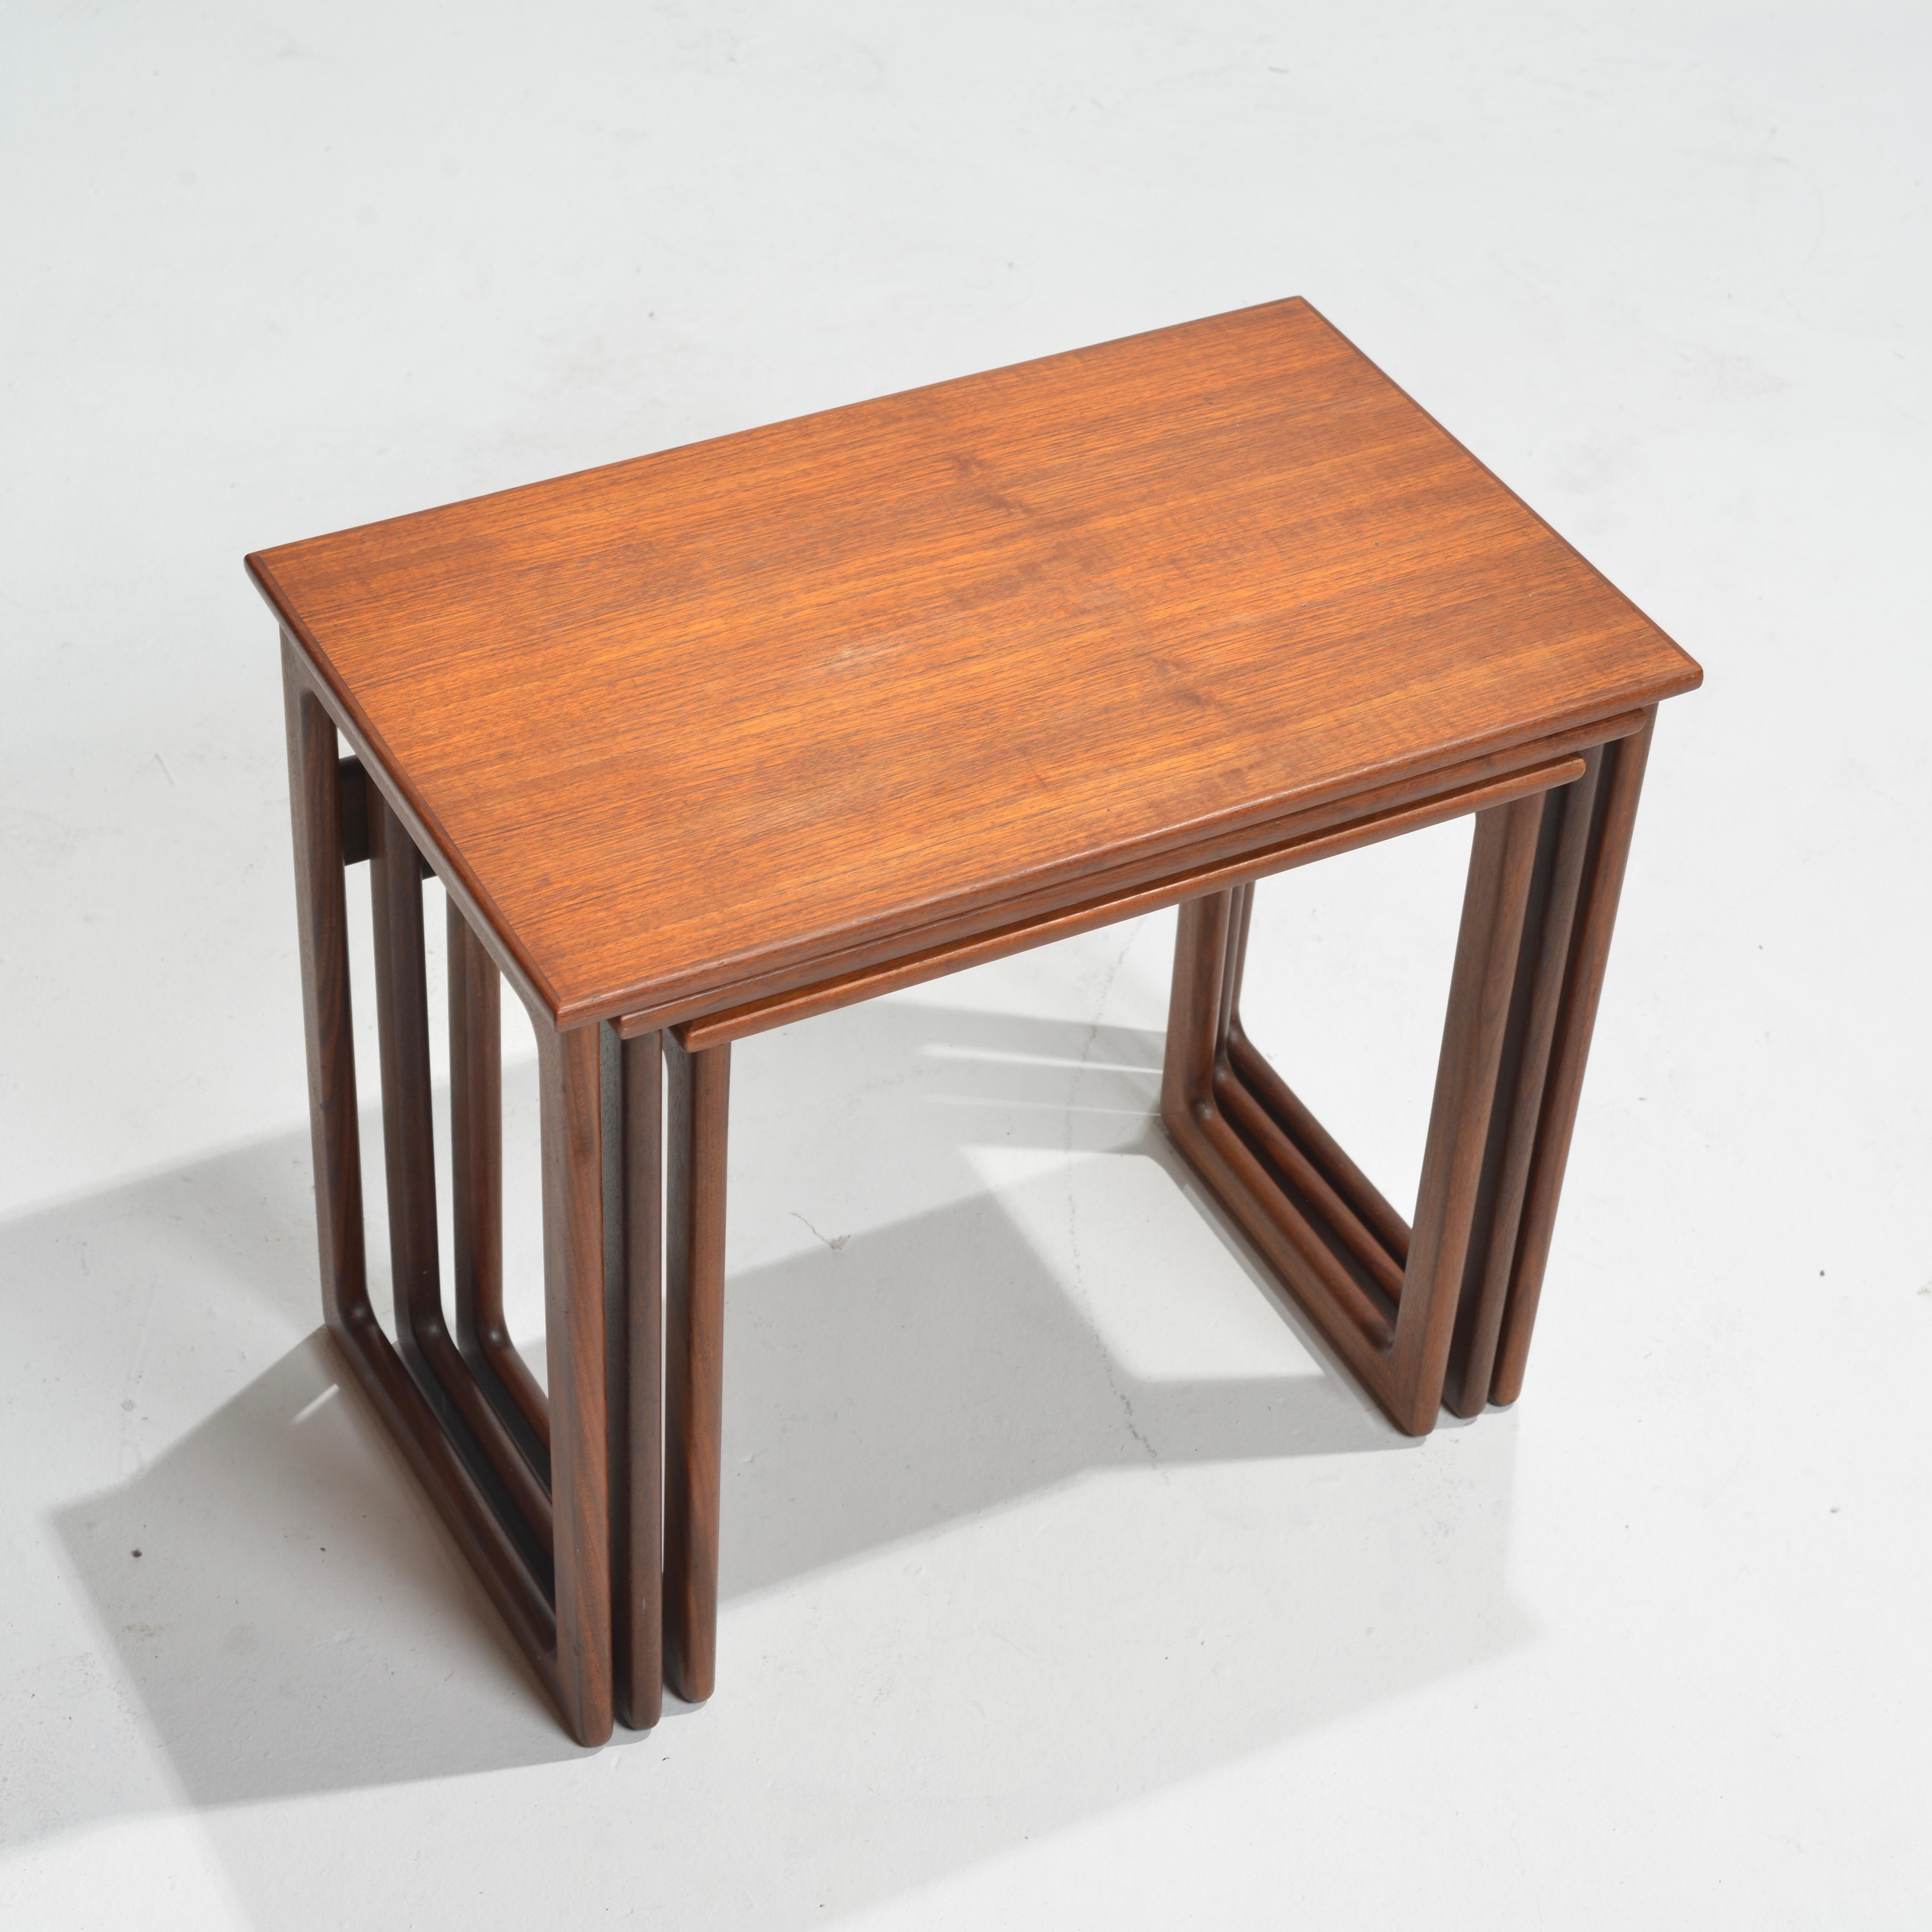 This is a stunning Nesting Table Set in teak by Kurt Østervig and masterfully executed by Jason Furniture in the 1960s. This set stands as a testament to Østervig's design prowess and the enduring charm of mid-century danish furniture. The versatile